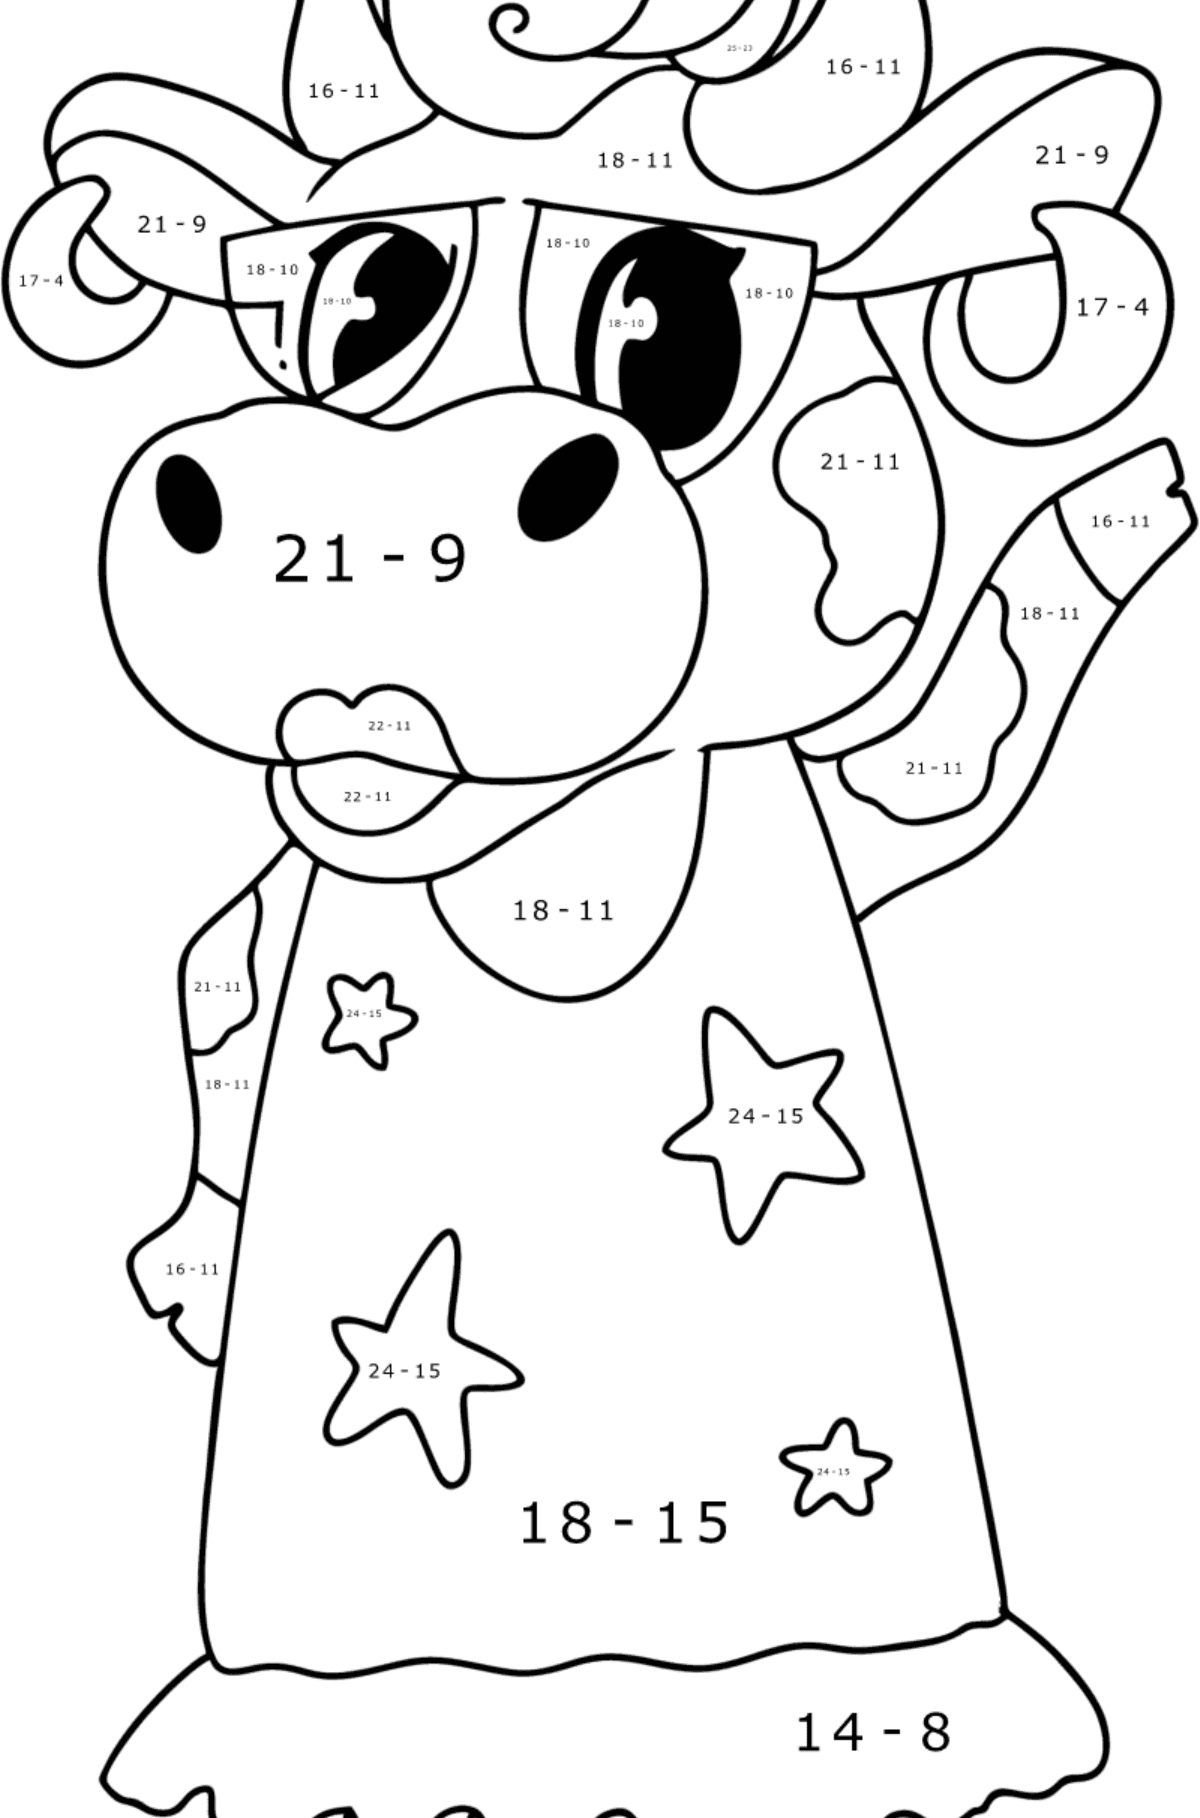 Cartoon cow standing up coloring page - Math Coloring - Subtraction for Kids